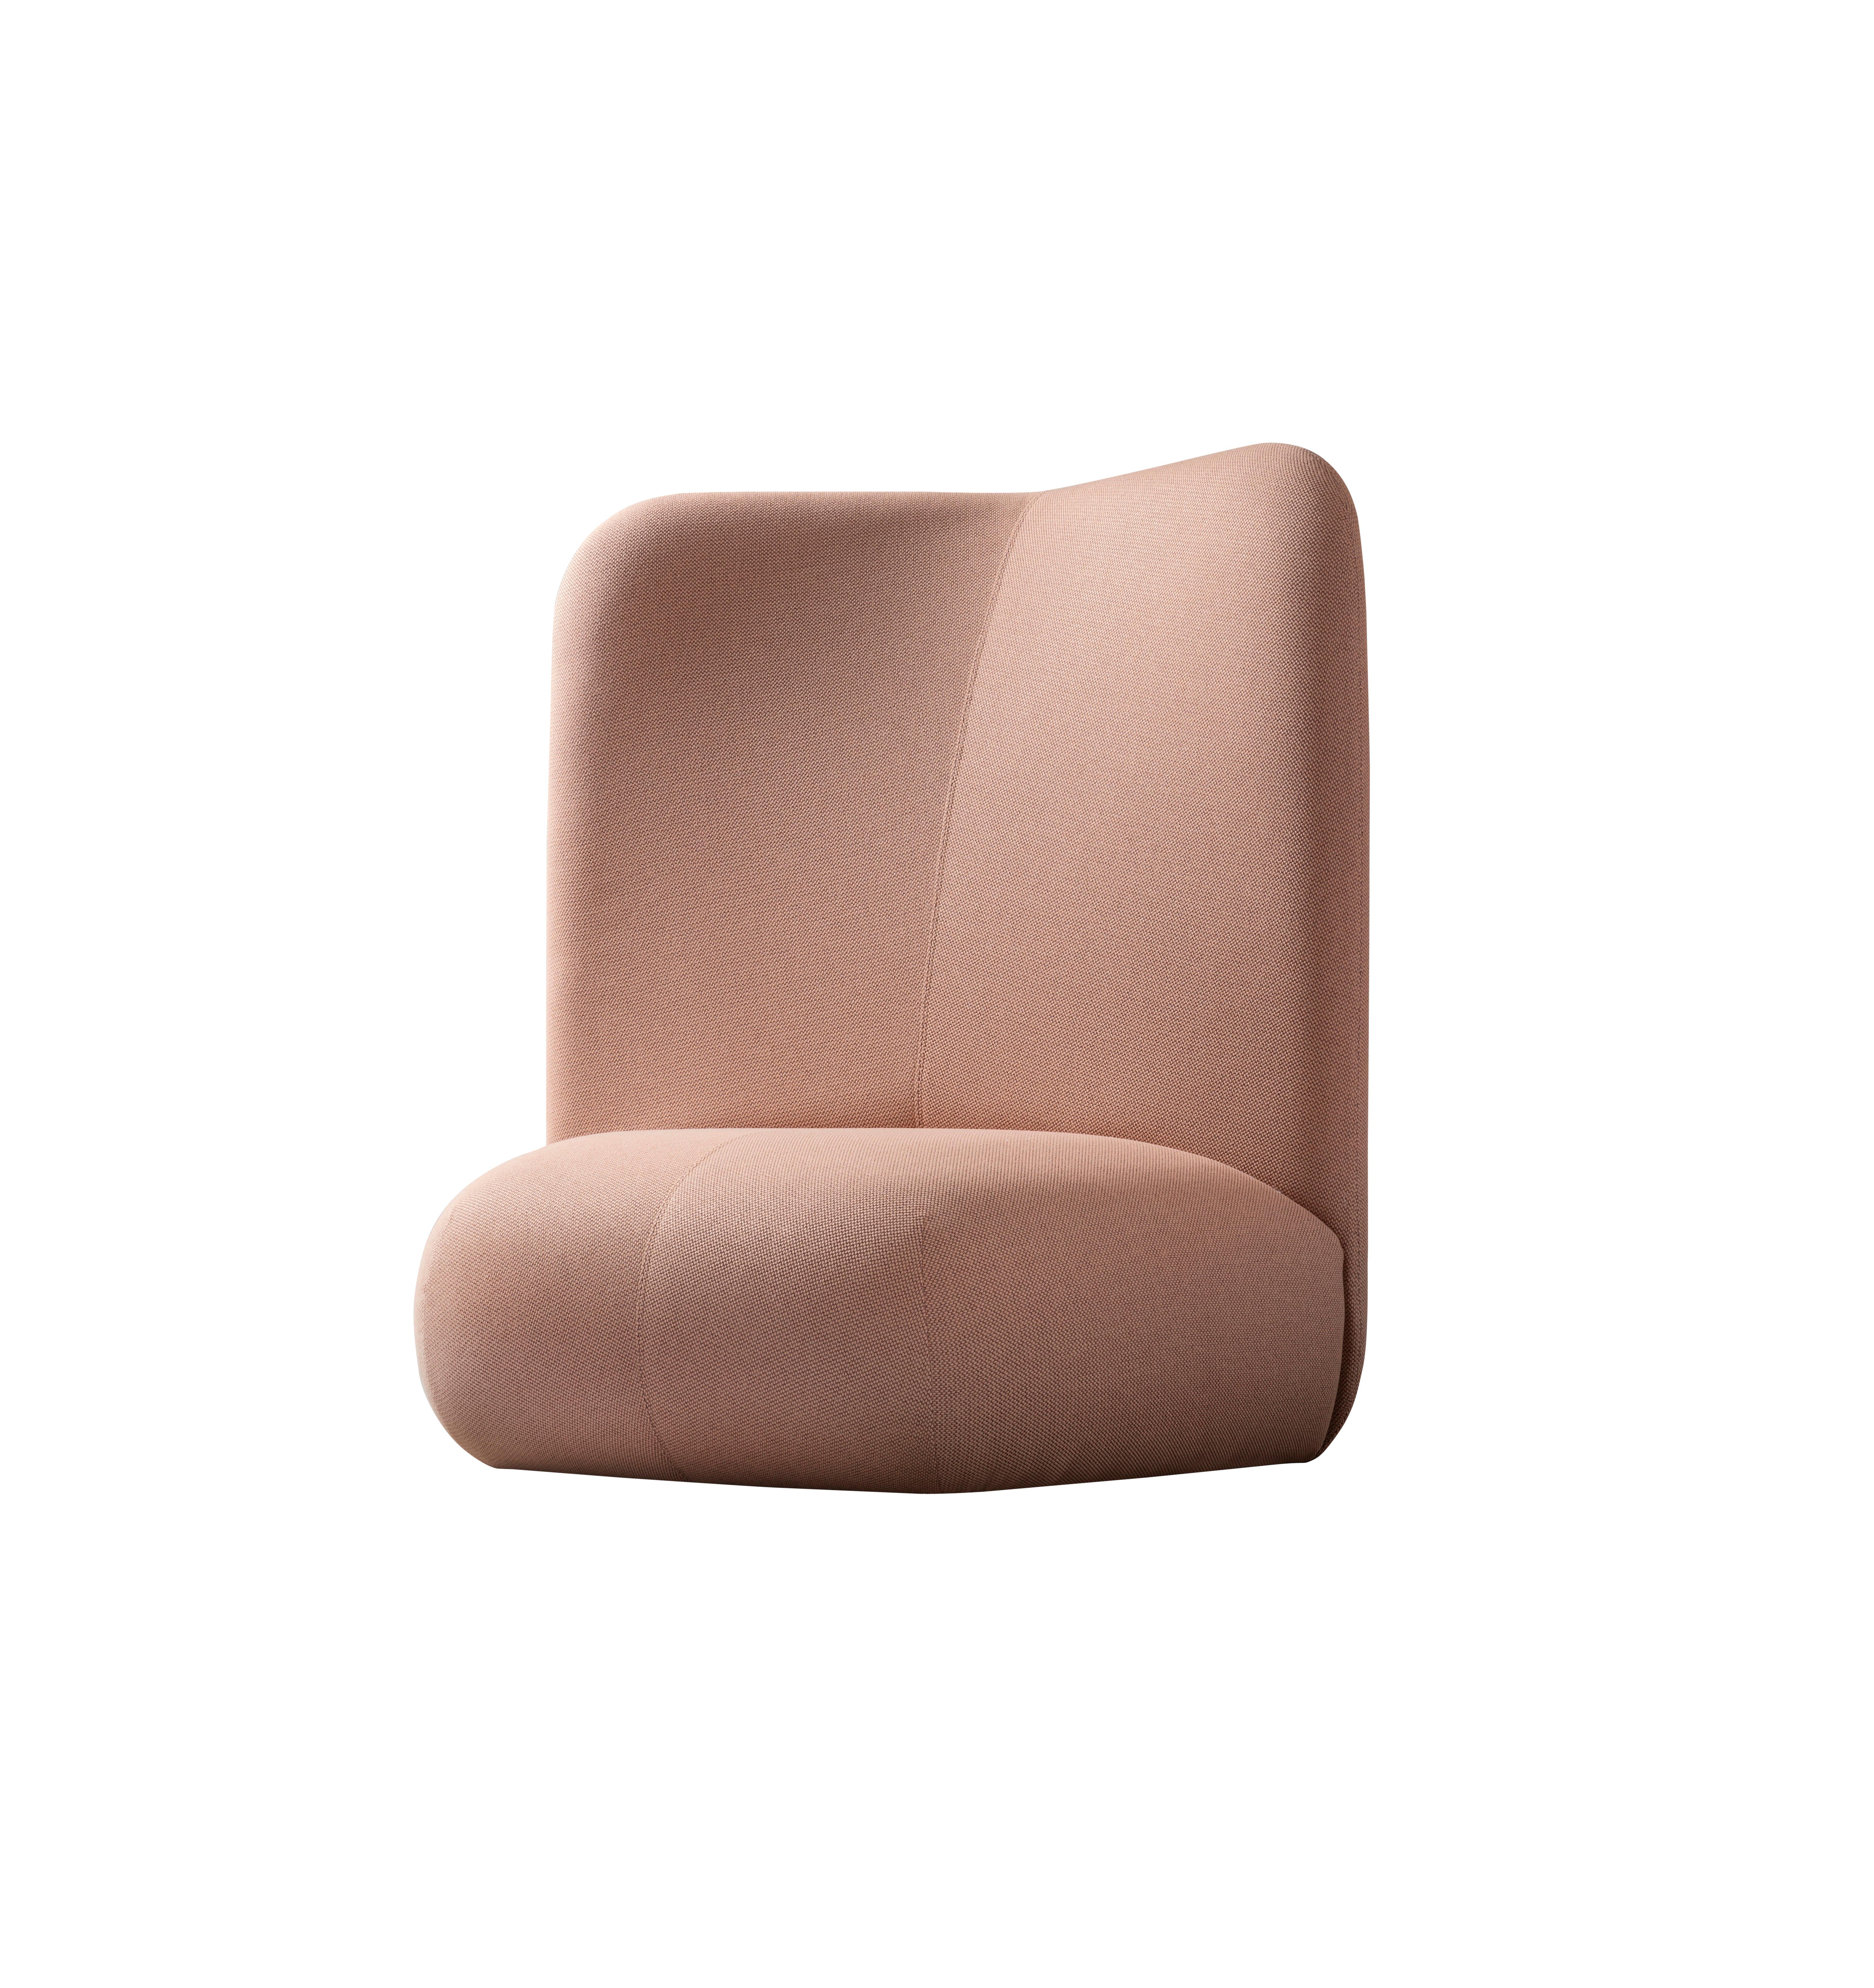 For Sale: Beige (Kvadrat Maharam Merit_035) Botera High Chair in Upholstery, by E-GGS